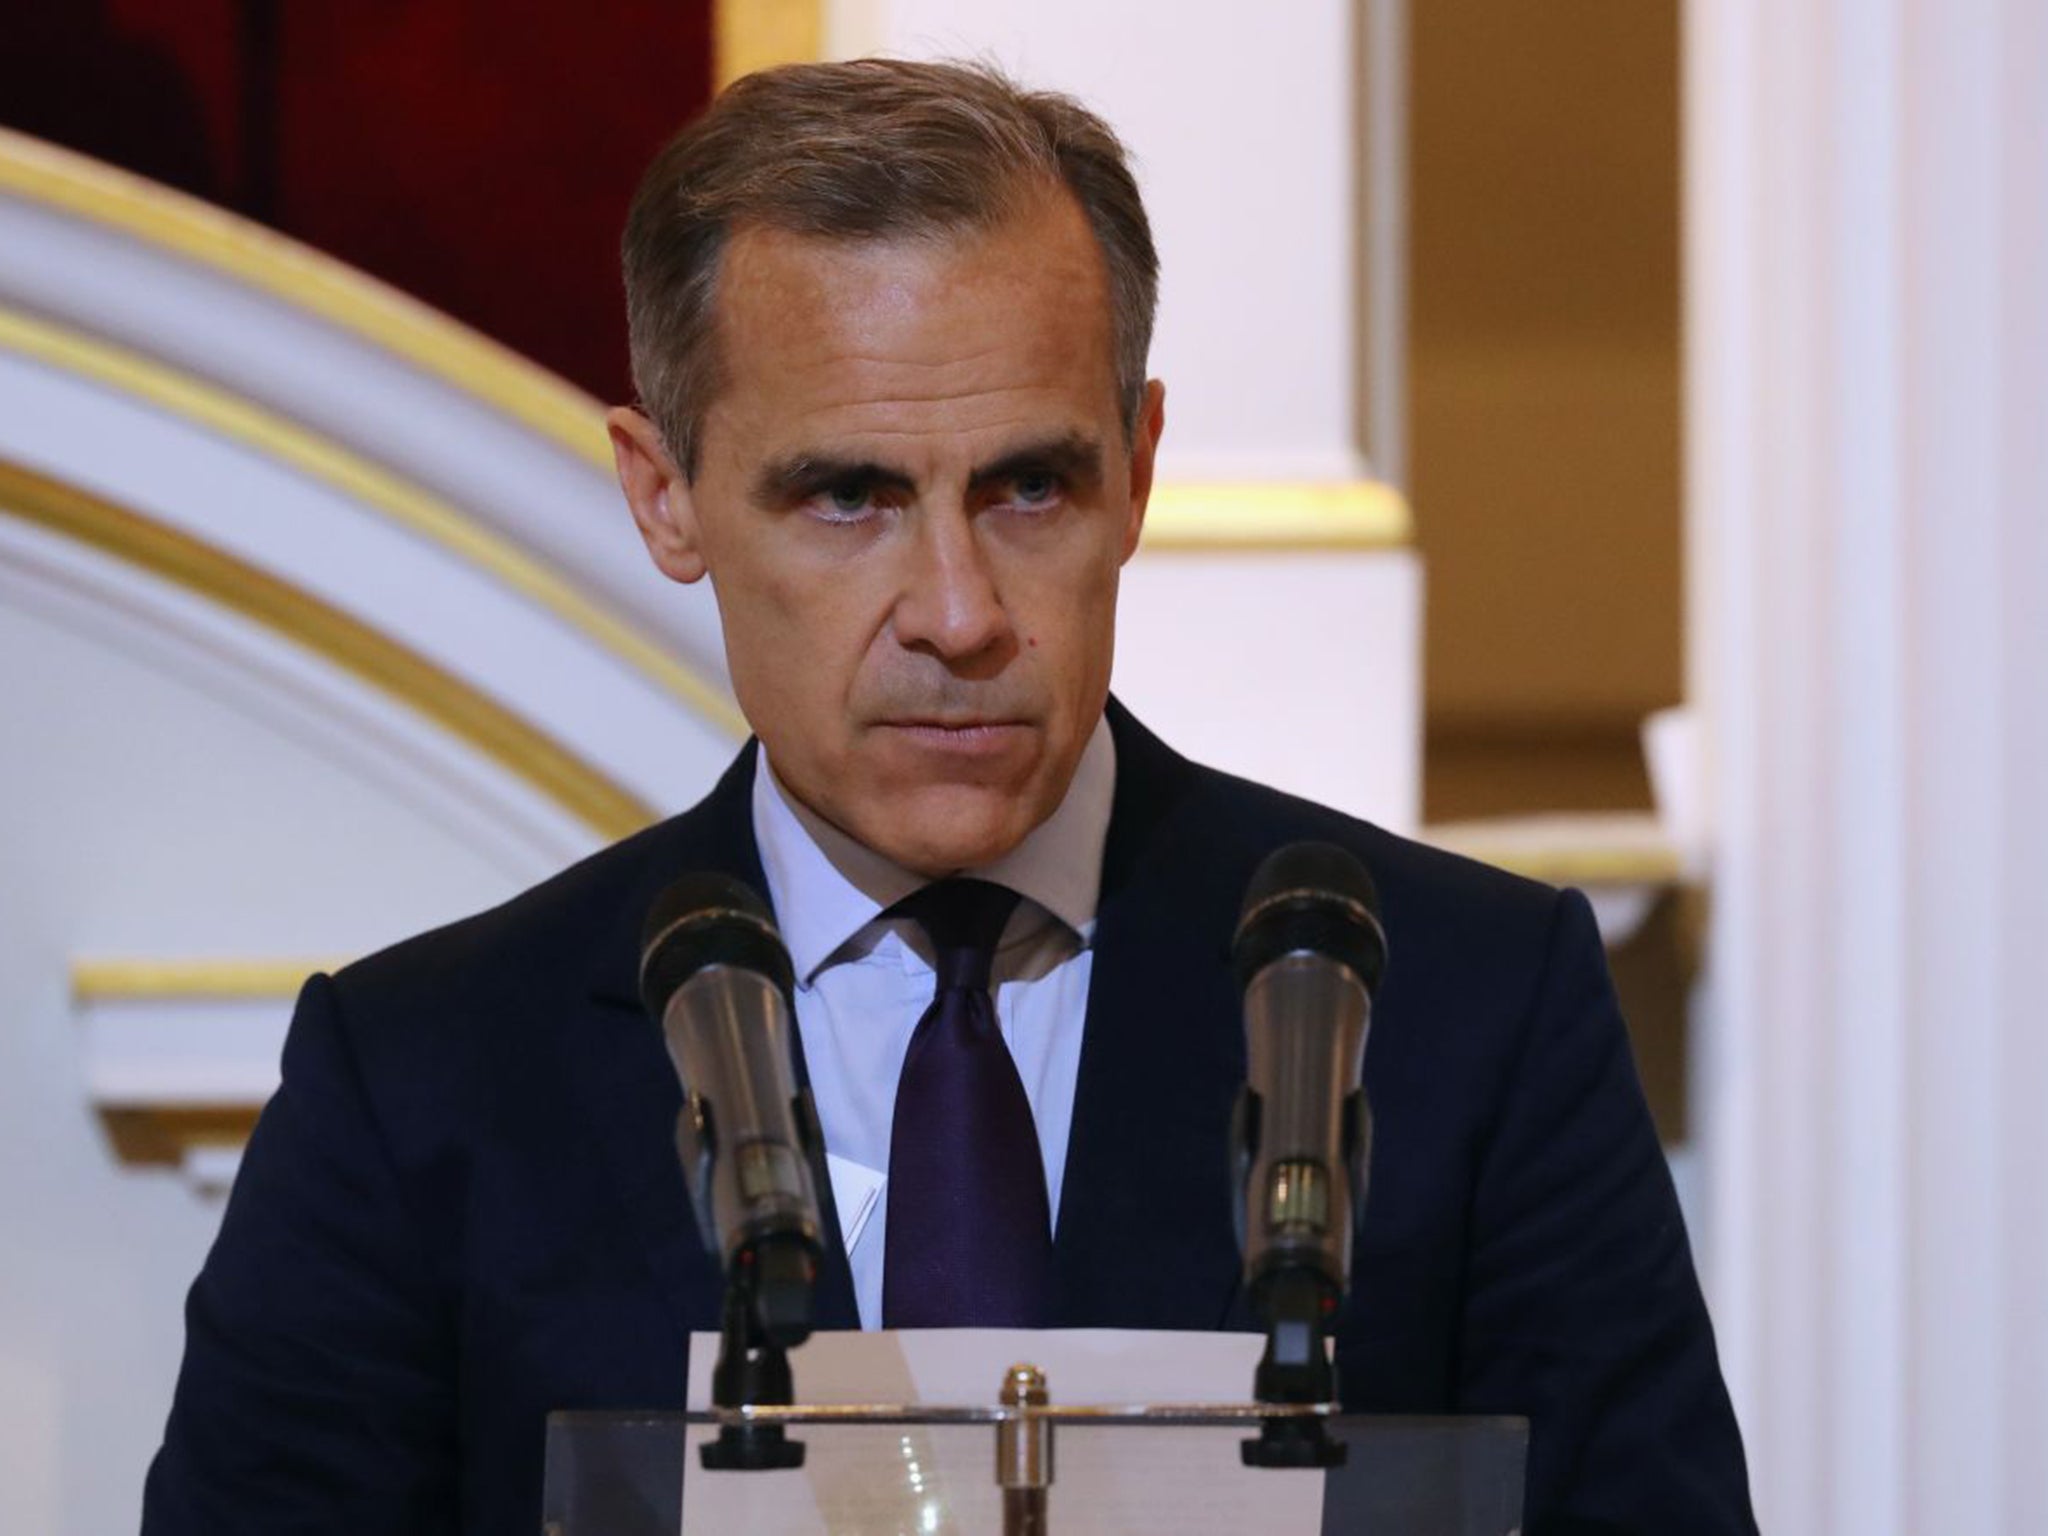 The Bank of England has hinted that it will cut interest rates and further quantitative easing